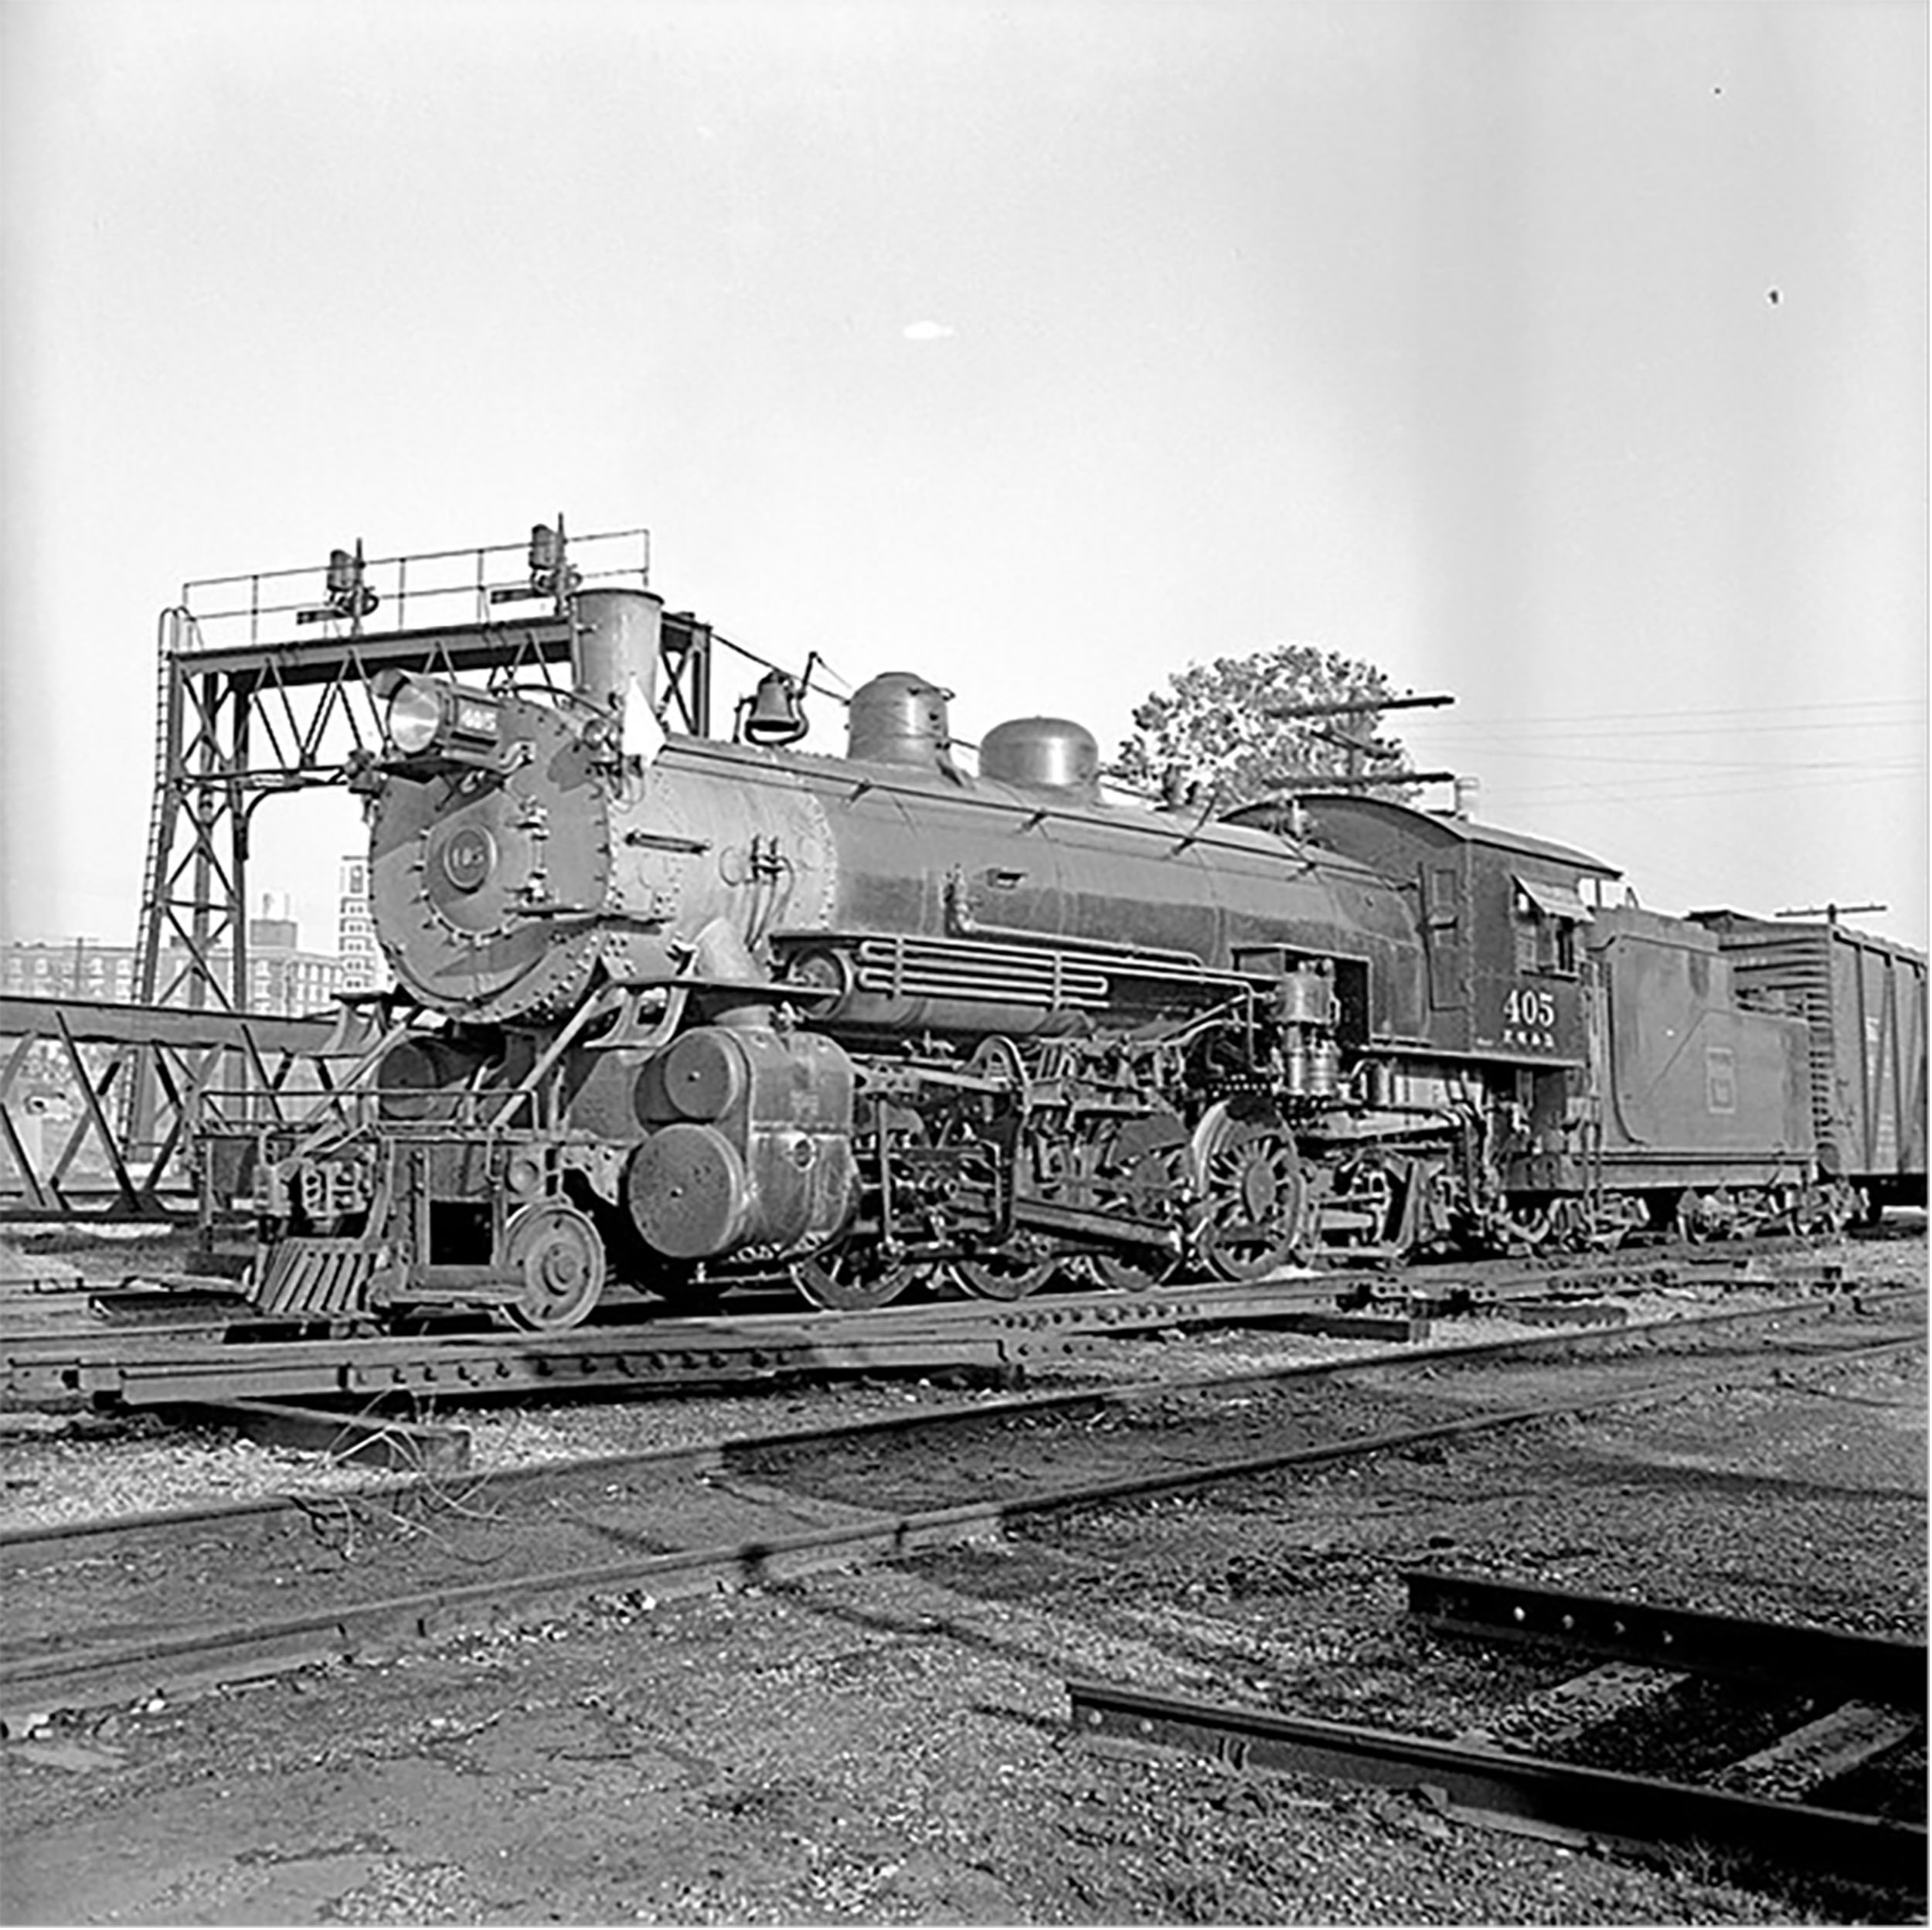 FW&D Locomotive No. 405 with tender in Dallas in undated photo. Photo credit: DeGolyer Library, Southern Methodist University